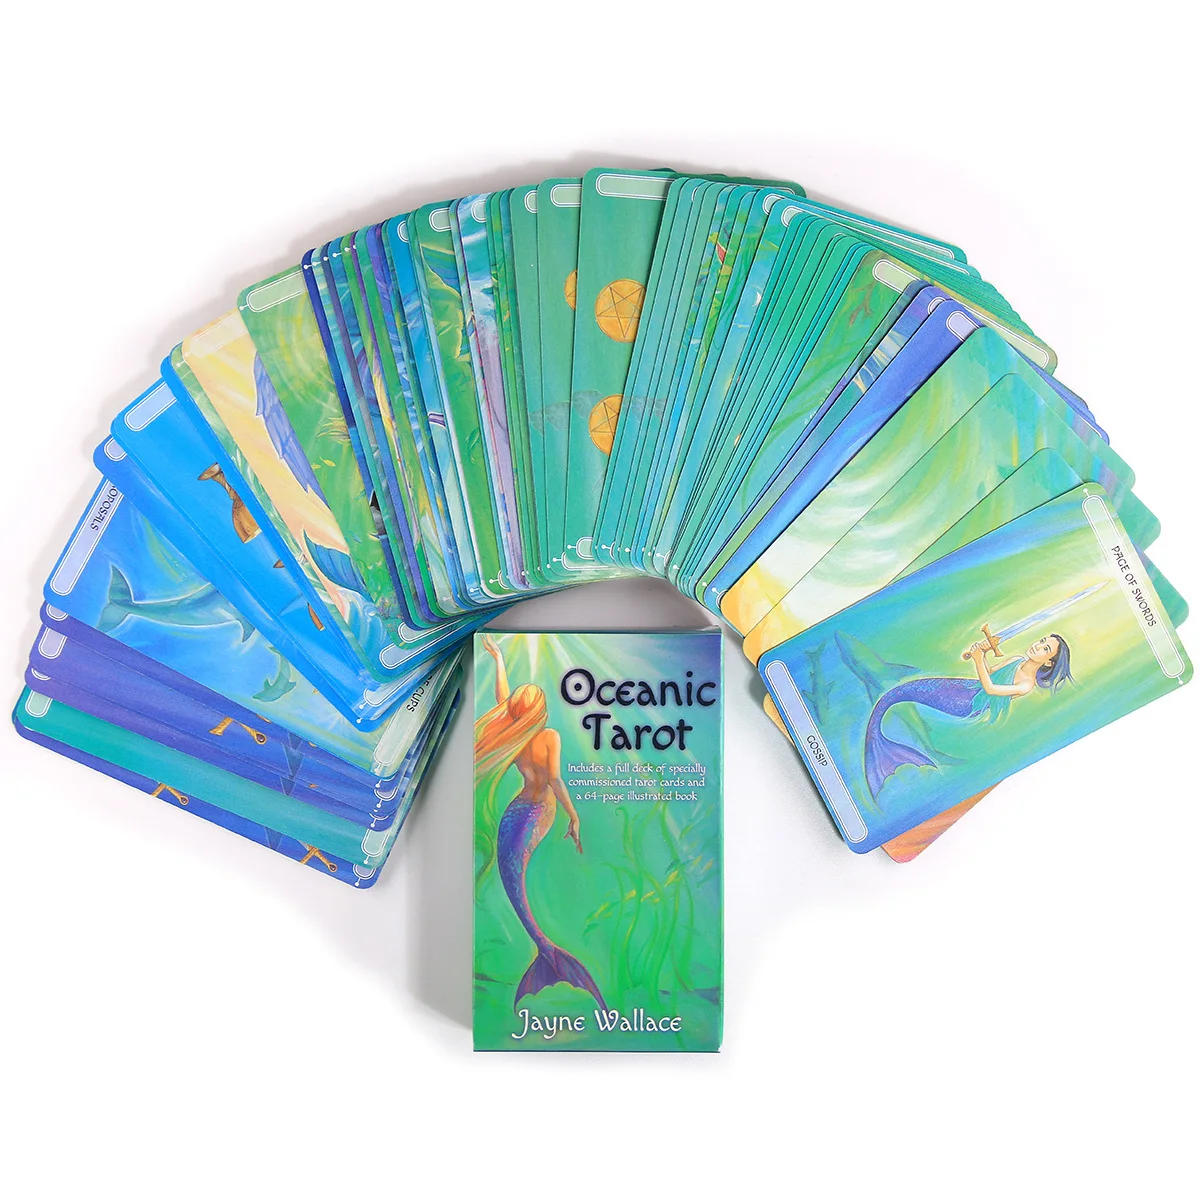 

New Oceanic Tarot Card Oracle Card for Divination Fate English Tarot Deck Card Game Board Game for Adult With PDF Guidance